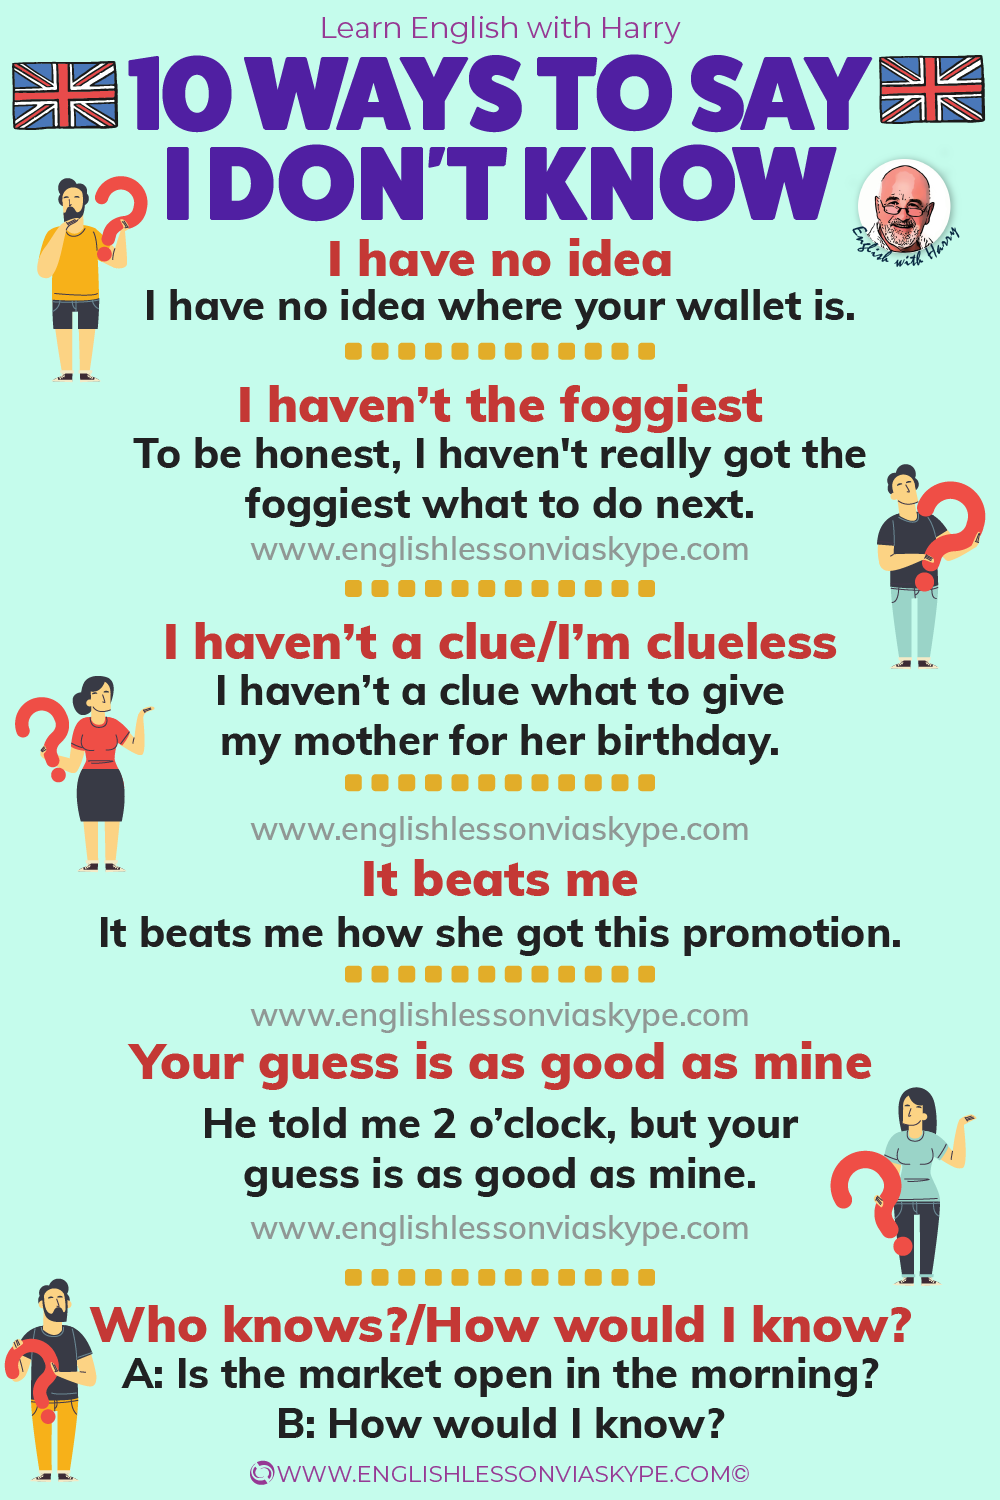 Other Ways to Say I DON'T KNOW  Other ways to say, English study